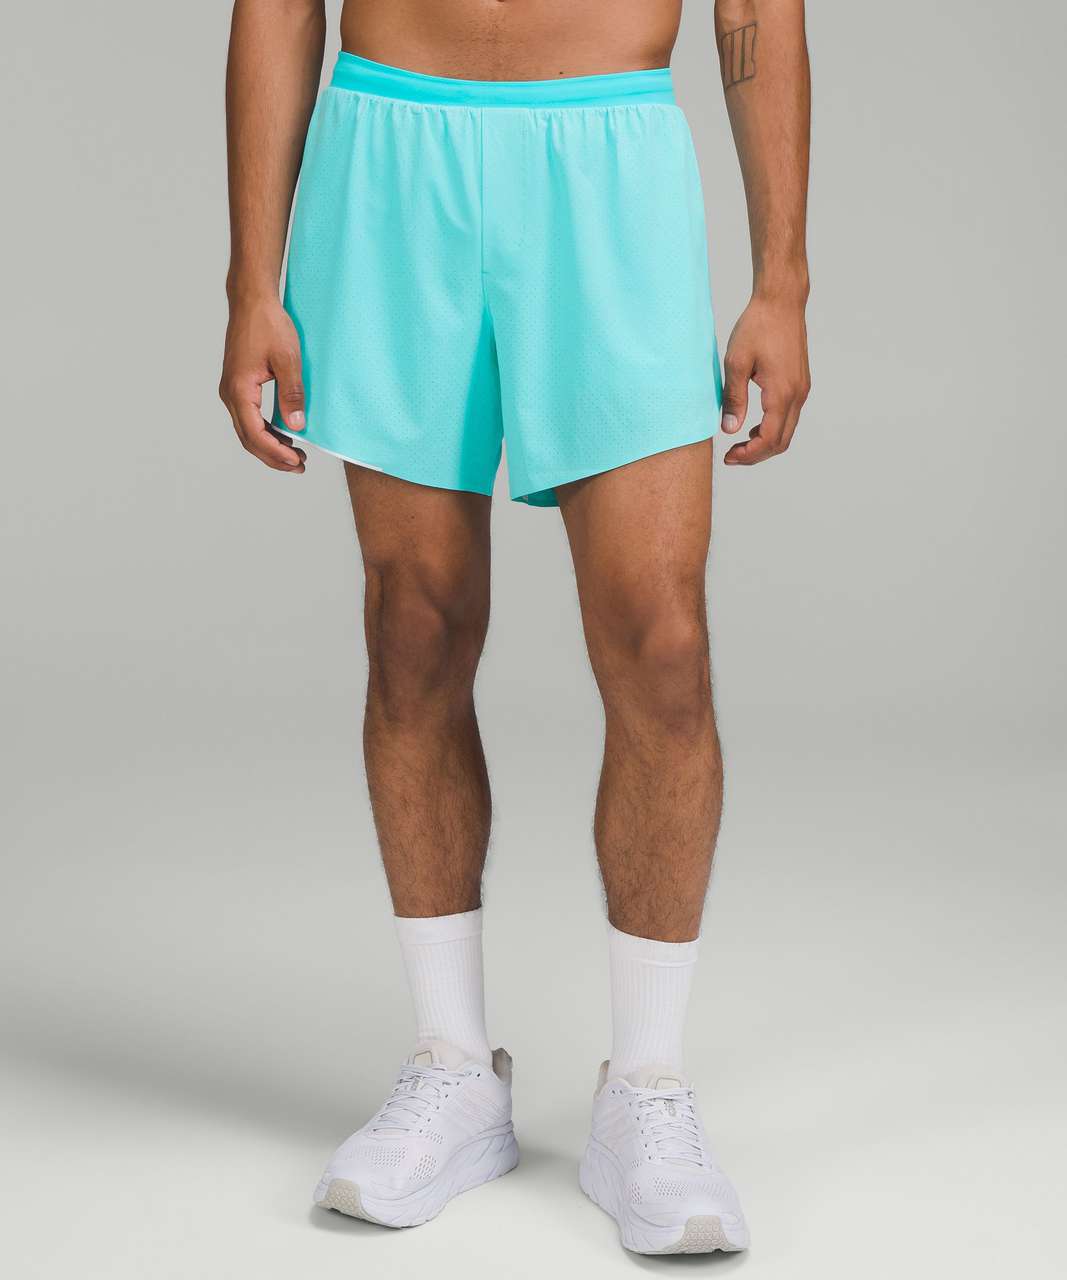 Lululemon Fast and Free Lined Short 6" - Electric Turquoise